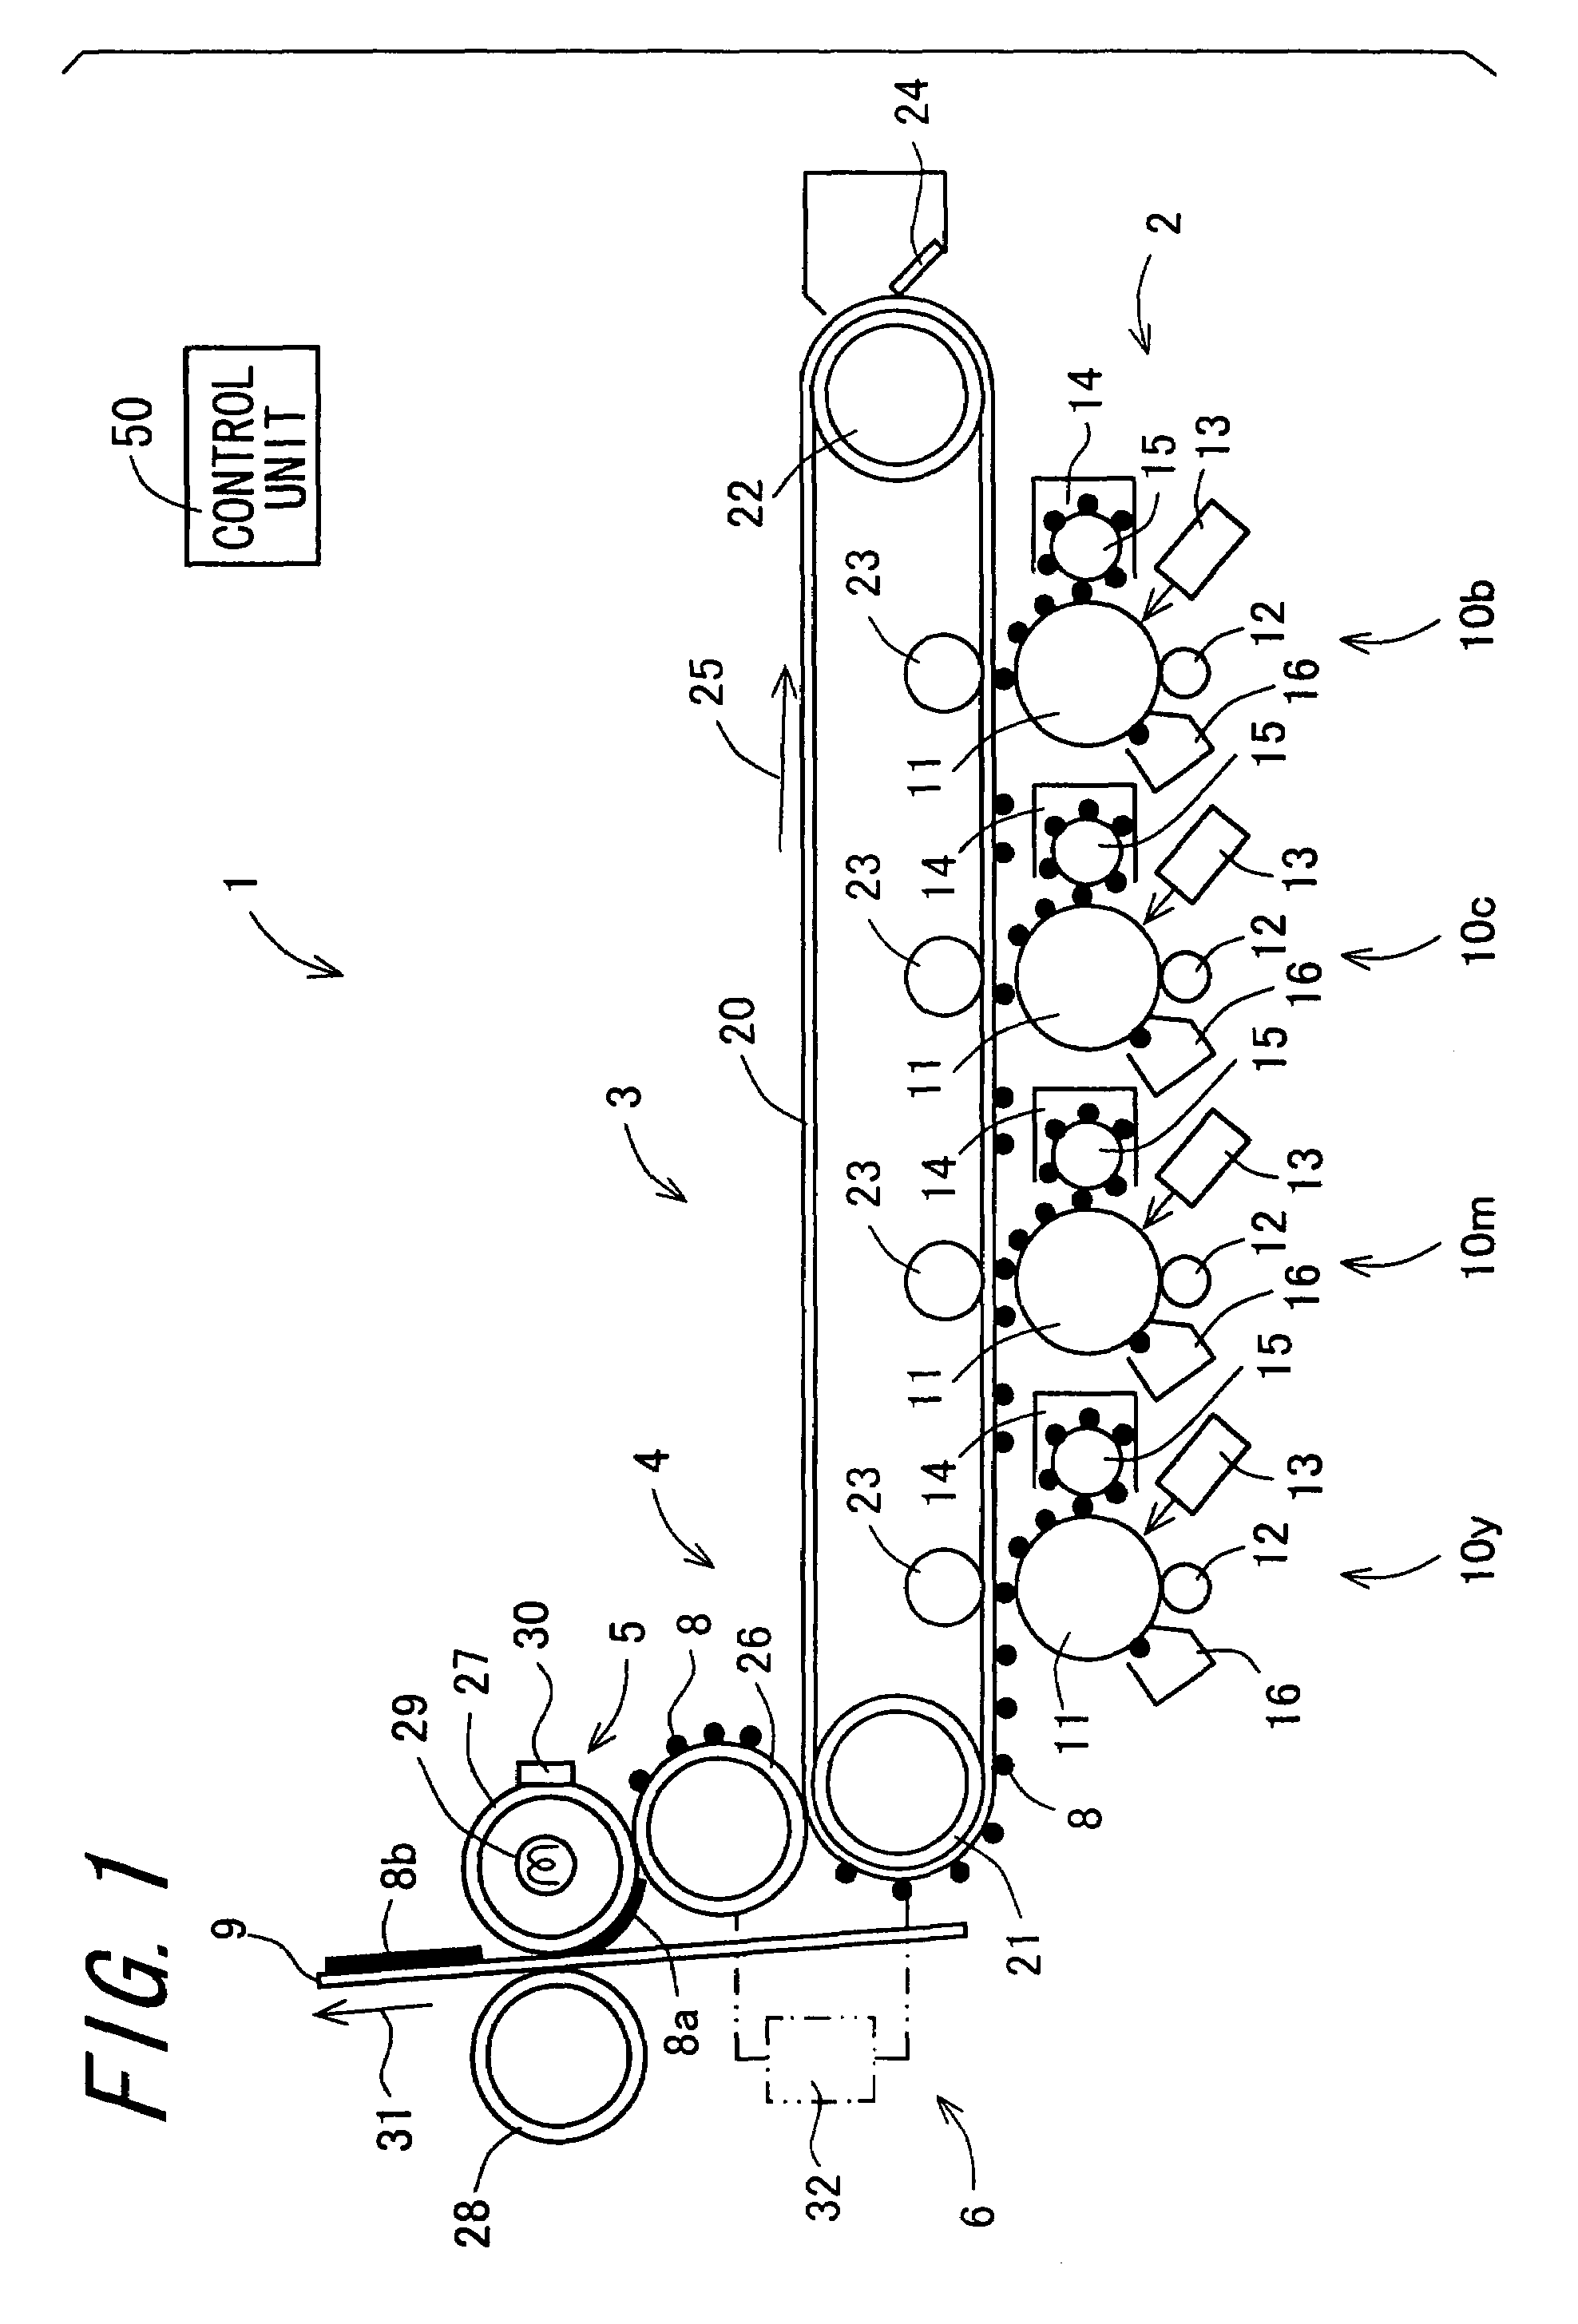 Image forming apparatus with first and second intermediate transfer sections